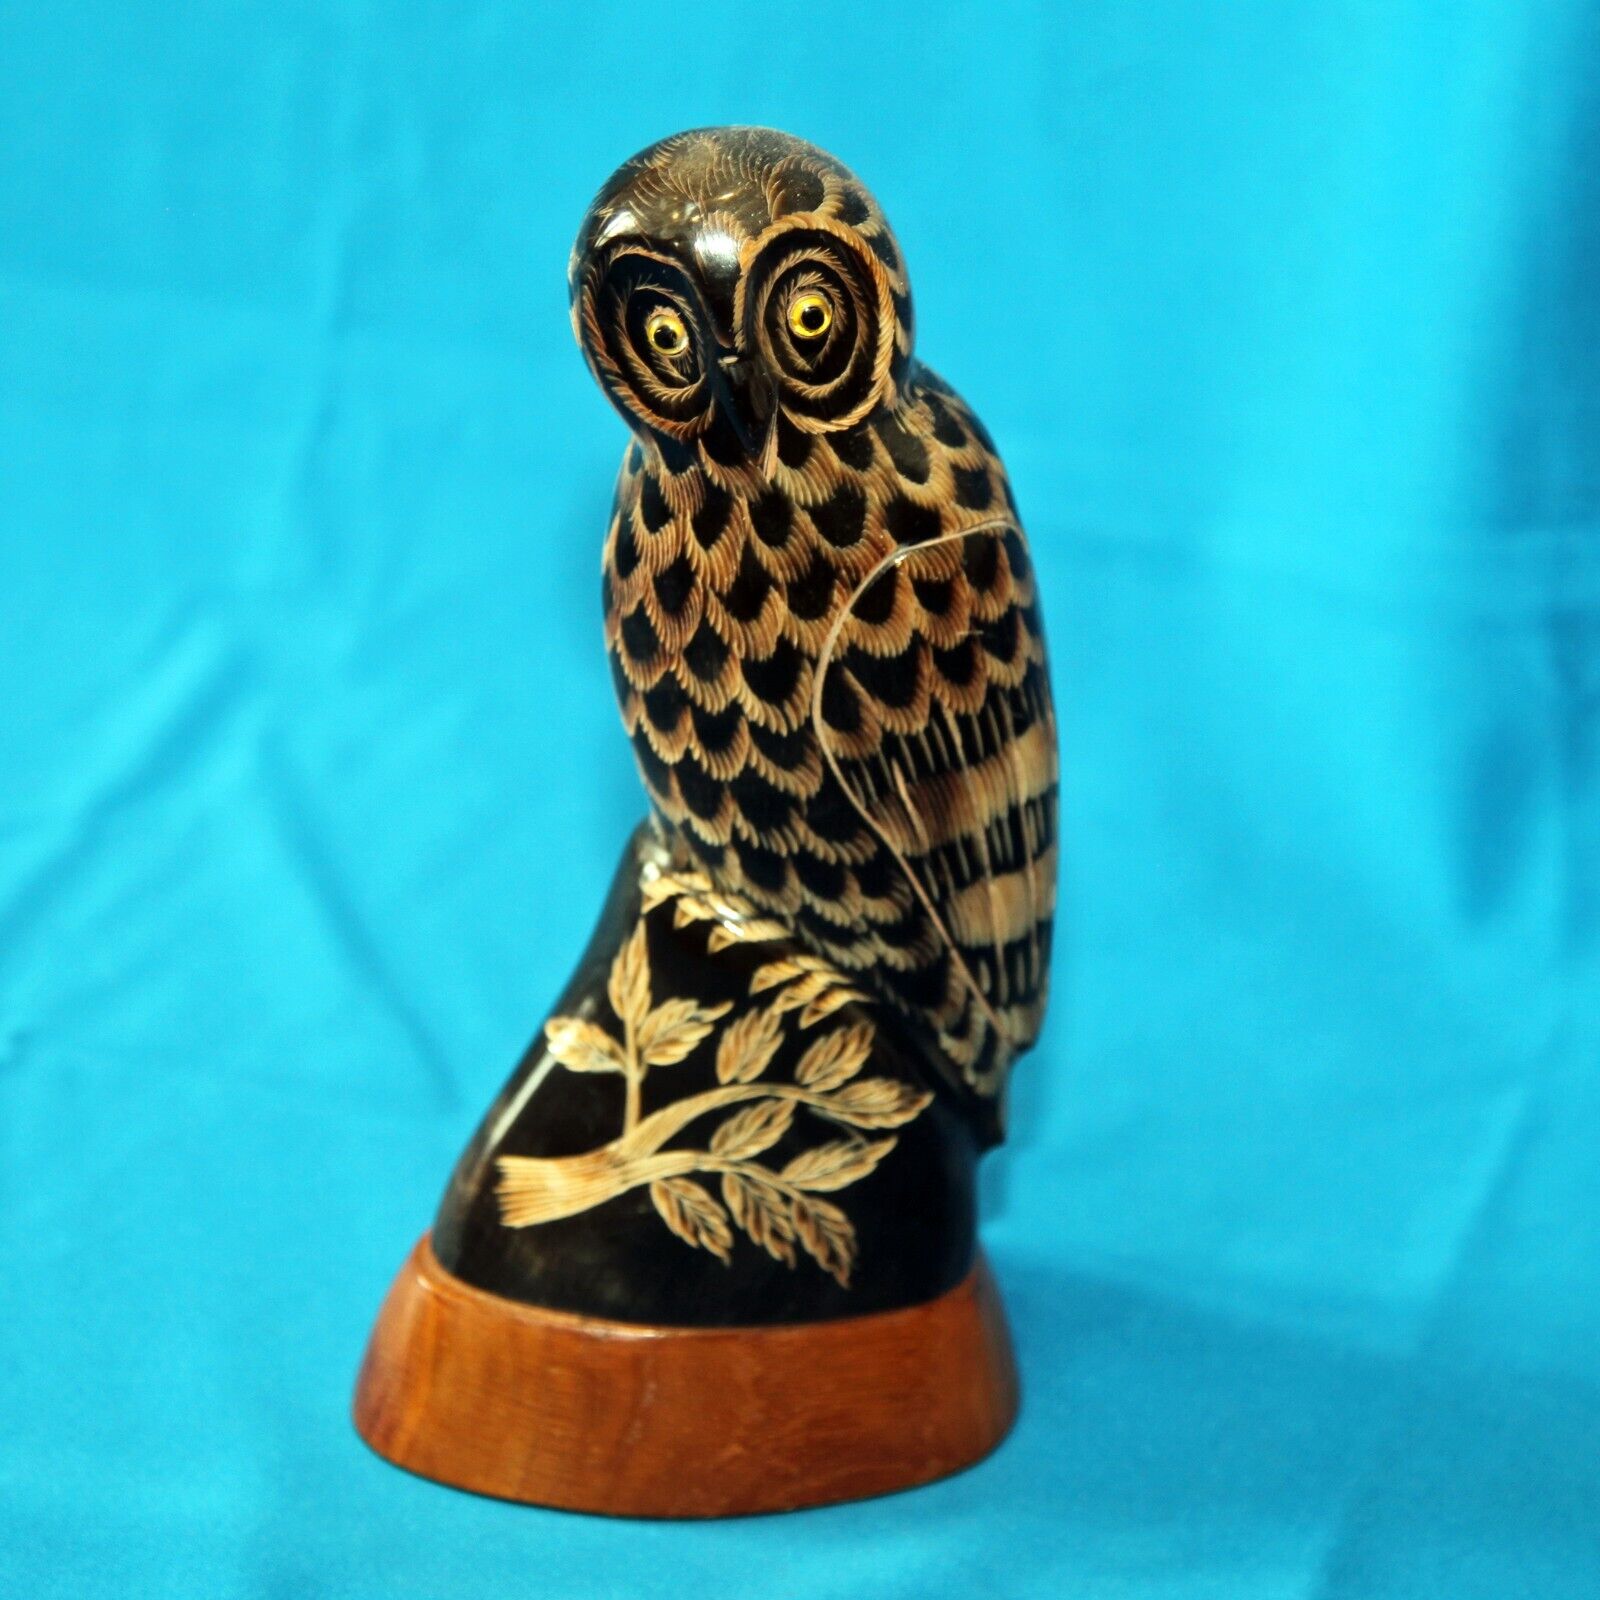 Owl Carving Amazing Detail One Of A Kind Original carving BARRY STEIN